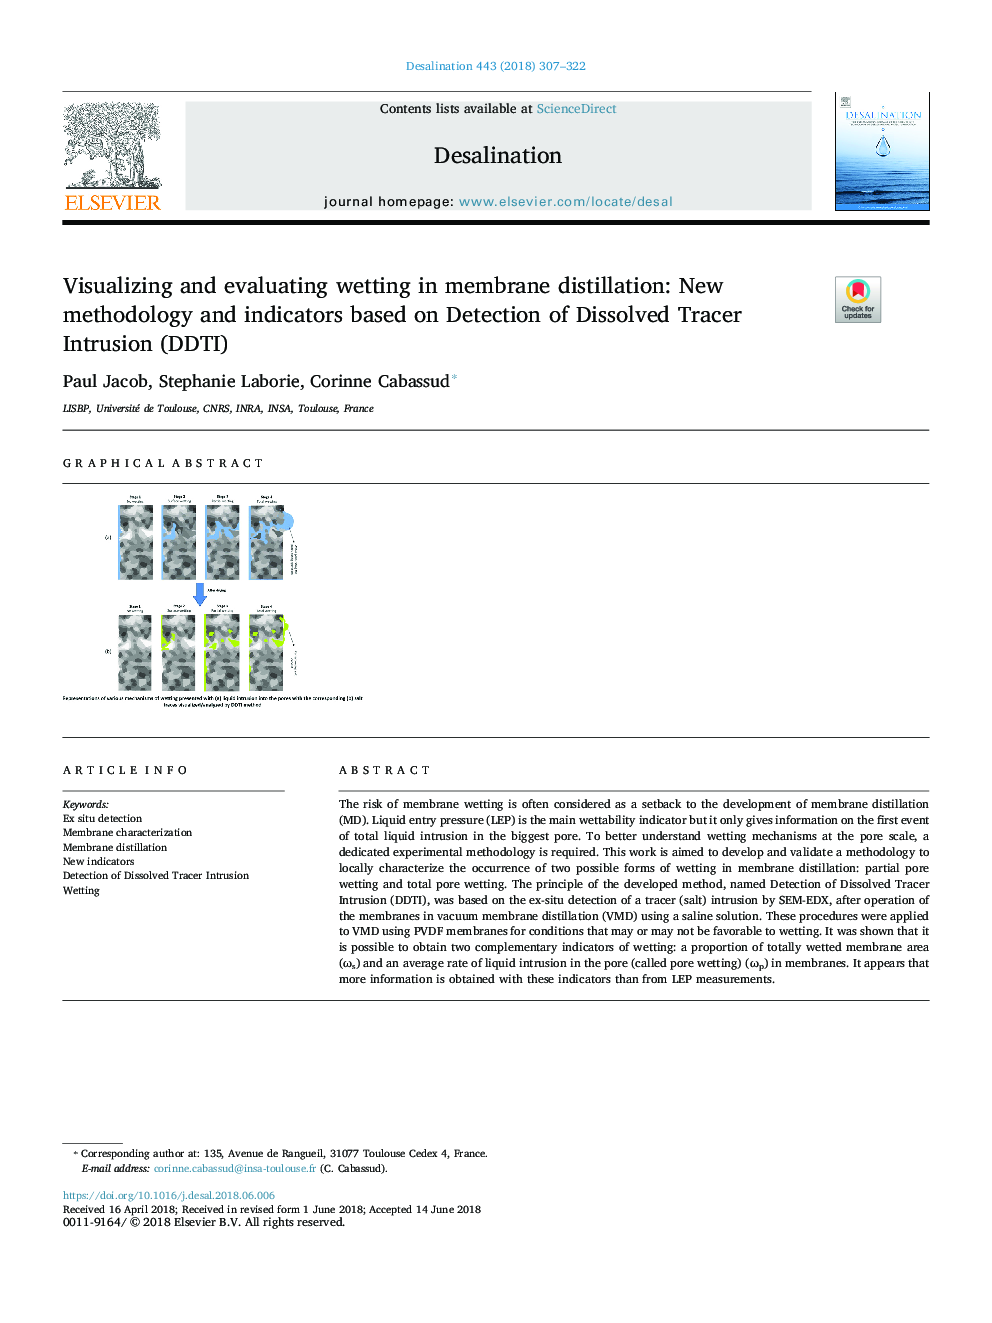 Visualizing and evaluating wetting in membrane distillation: New methodology and indicators based on Detection of Dissolved Tracer Intrusion (DDTI)